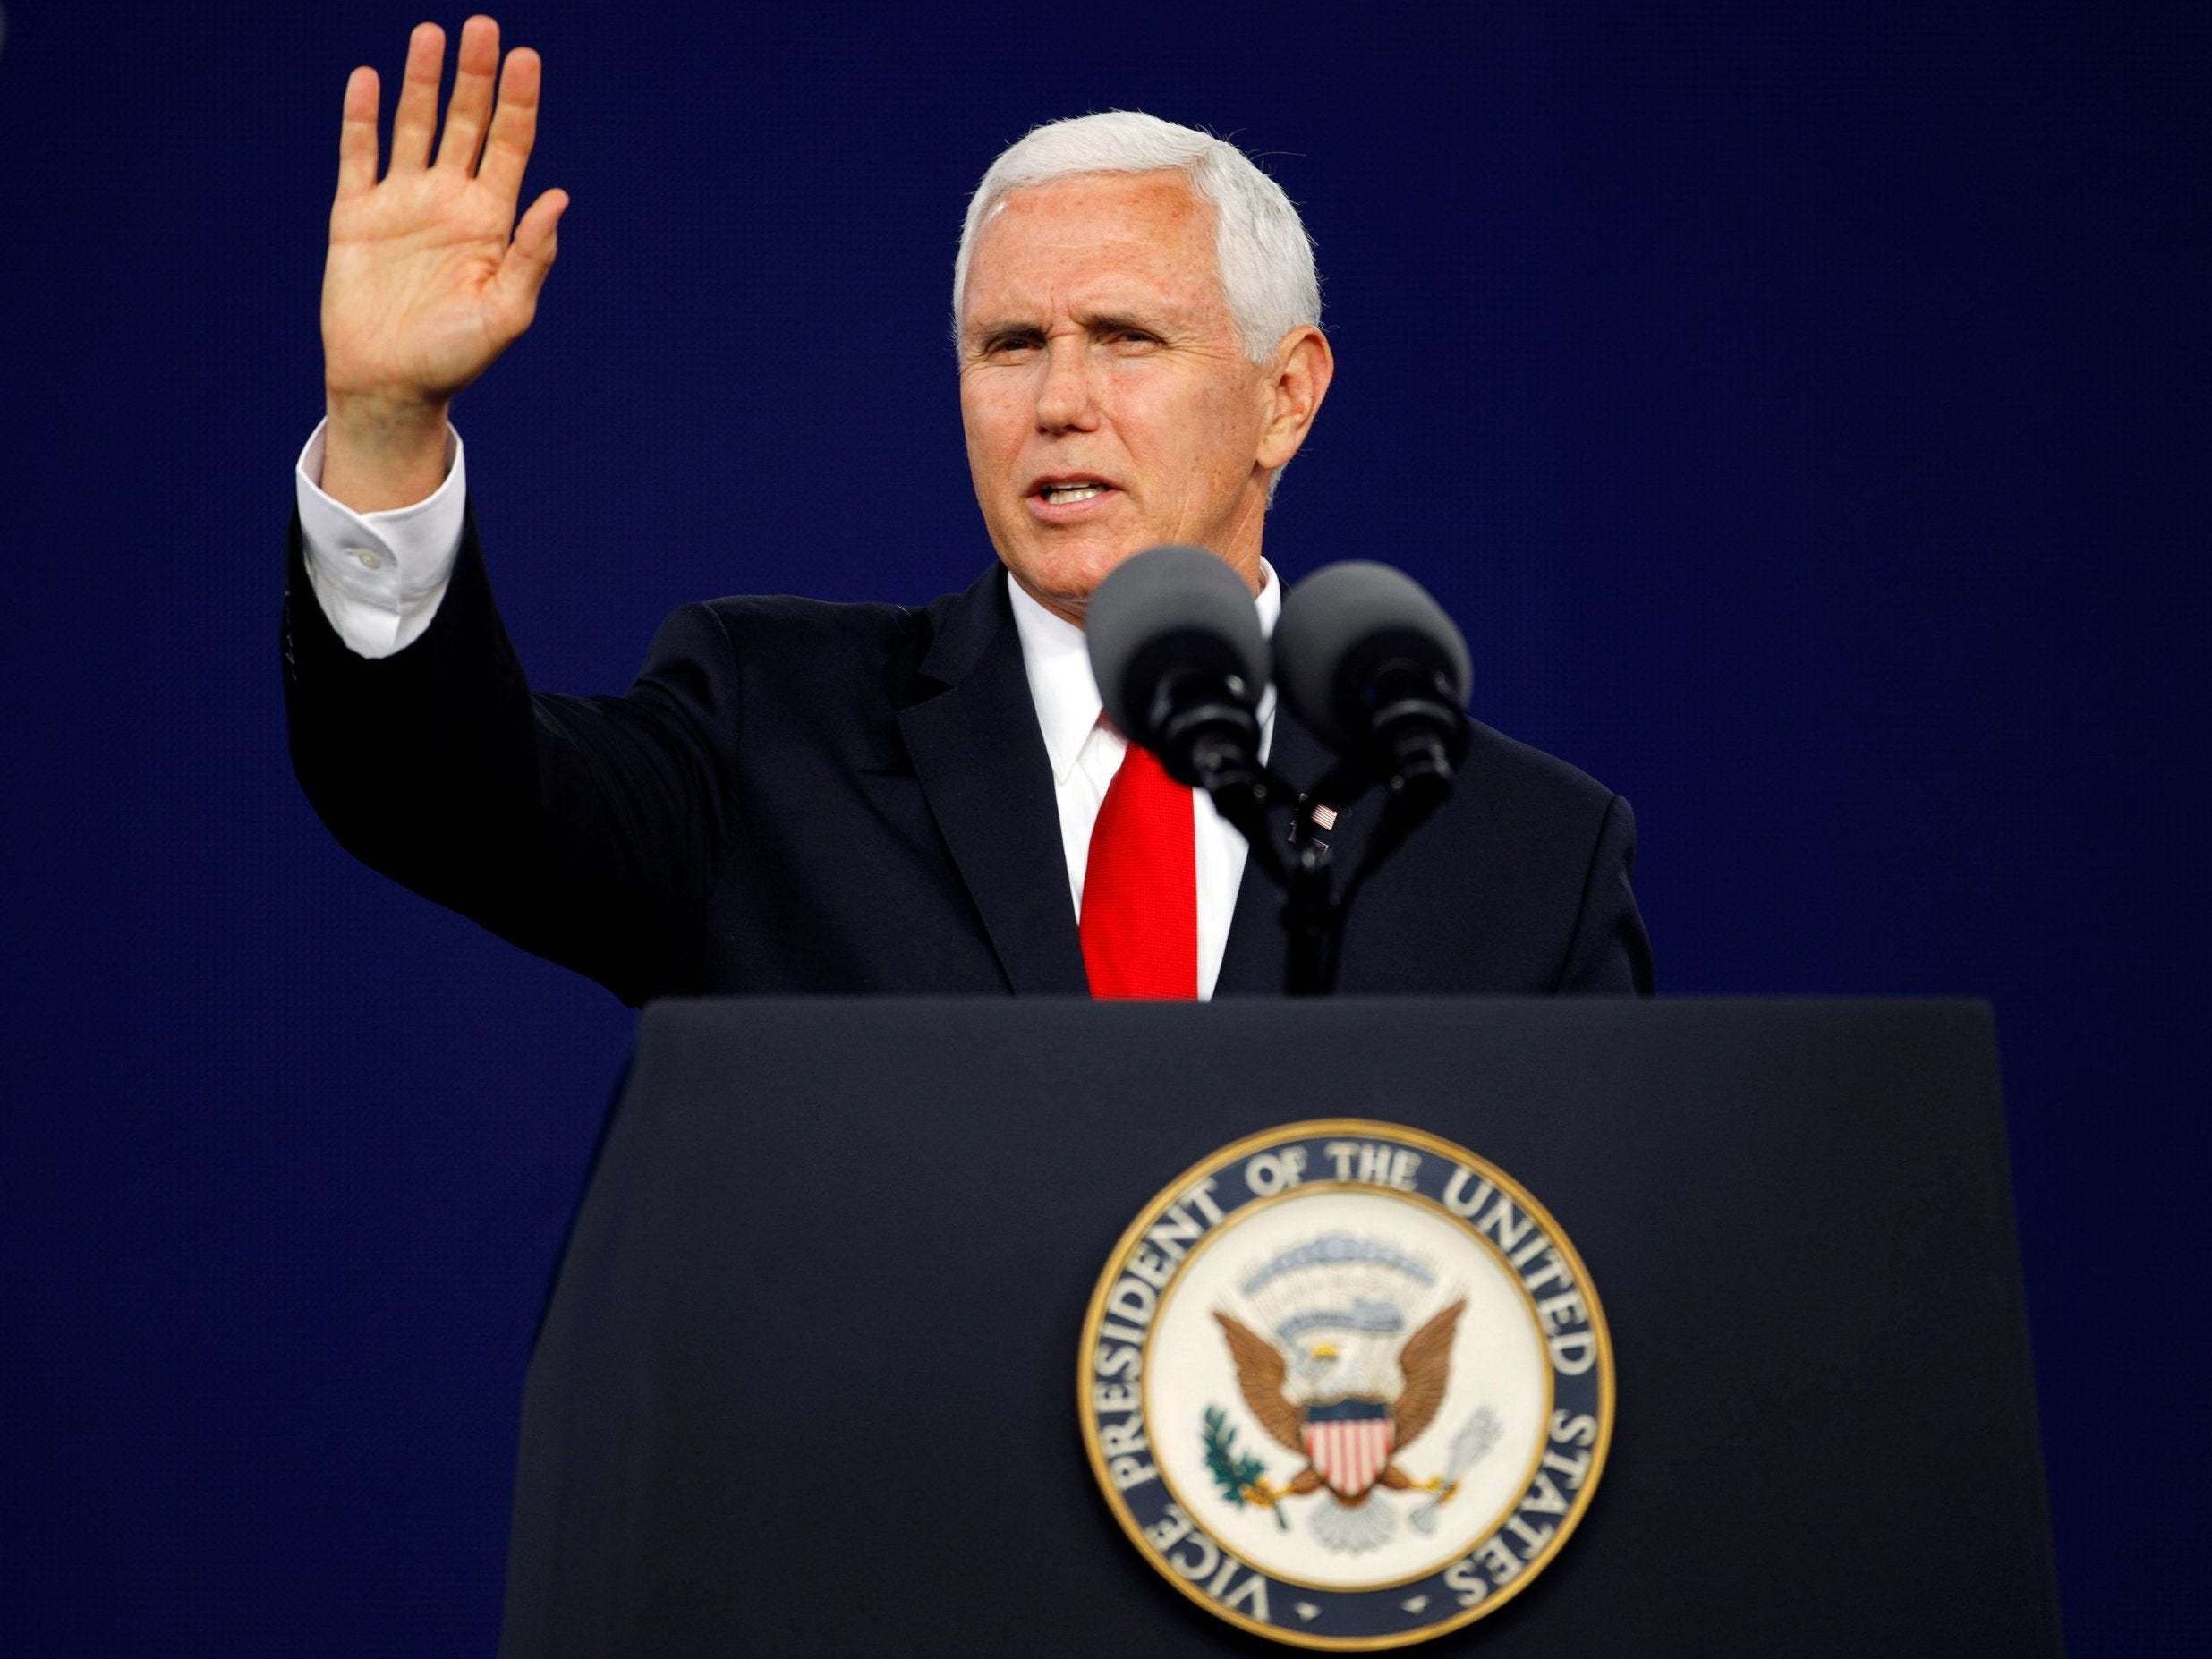 Christians should prepare to be &apos;shunned&apos; for their beliefs, Mike Pence warns as he reaffirms Trump administration&apos;s anti-abortion stance